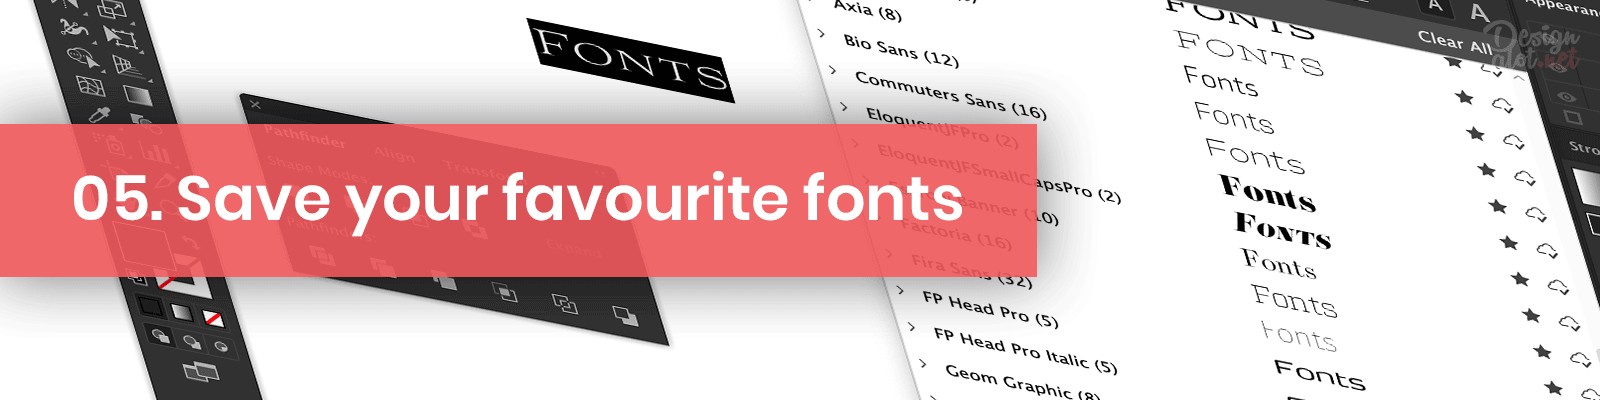 save-your-favourite-fonts